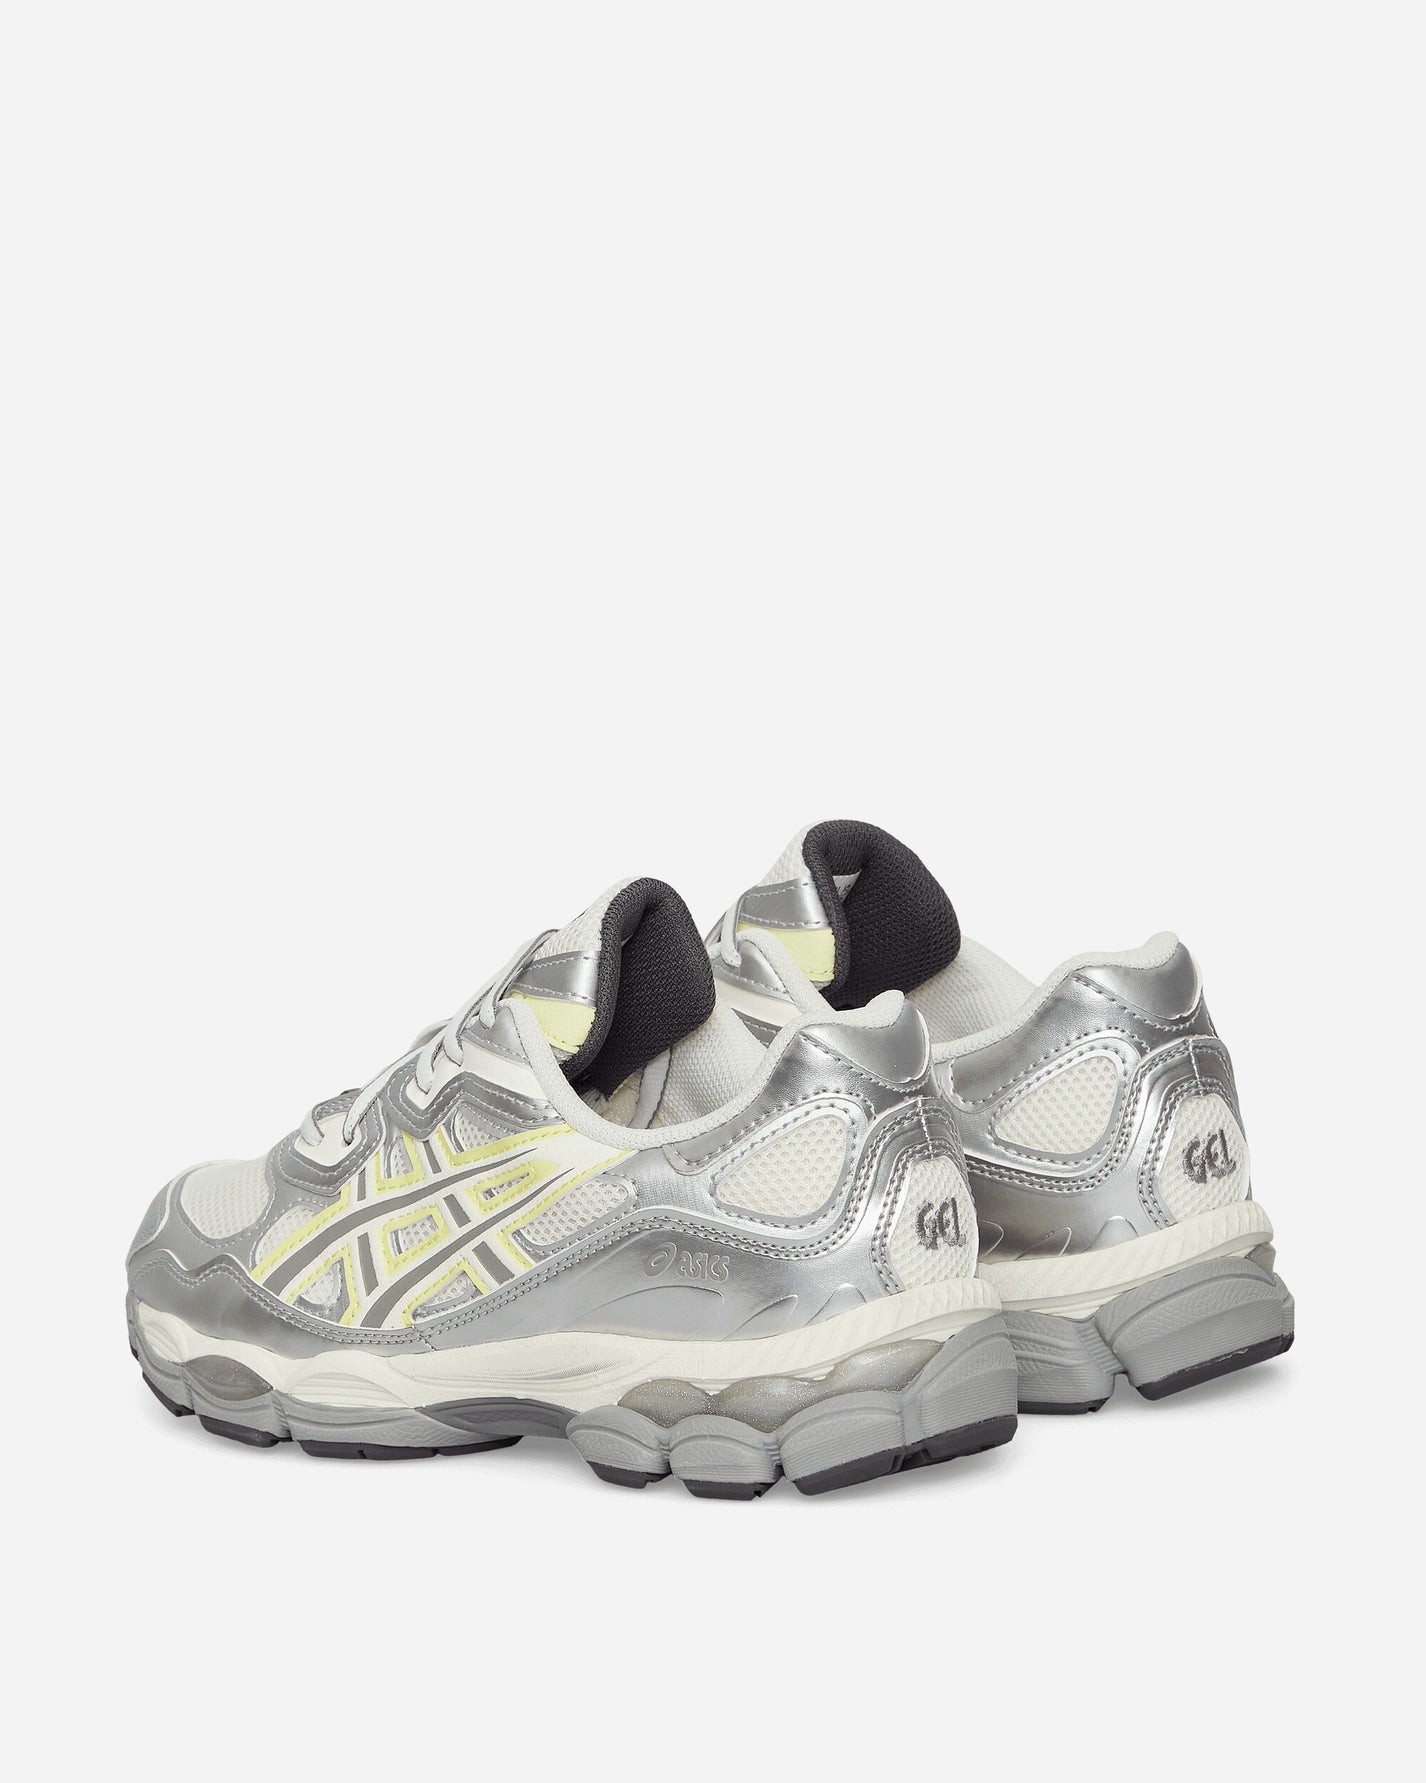 Asics Wmns Gel-Nyc White/Huddle Yellow Sneakers Low 1202A498-100